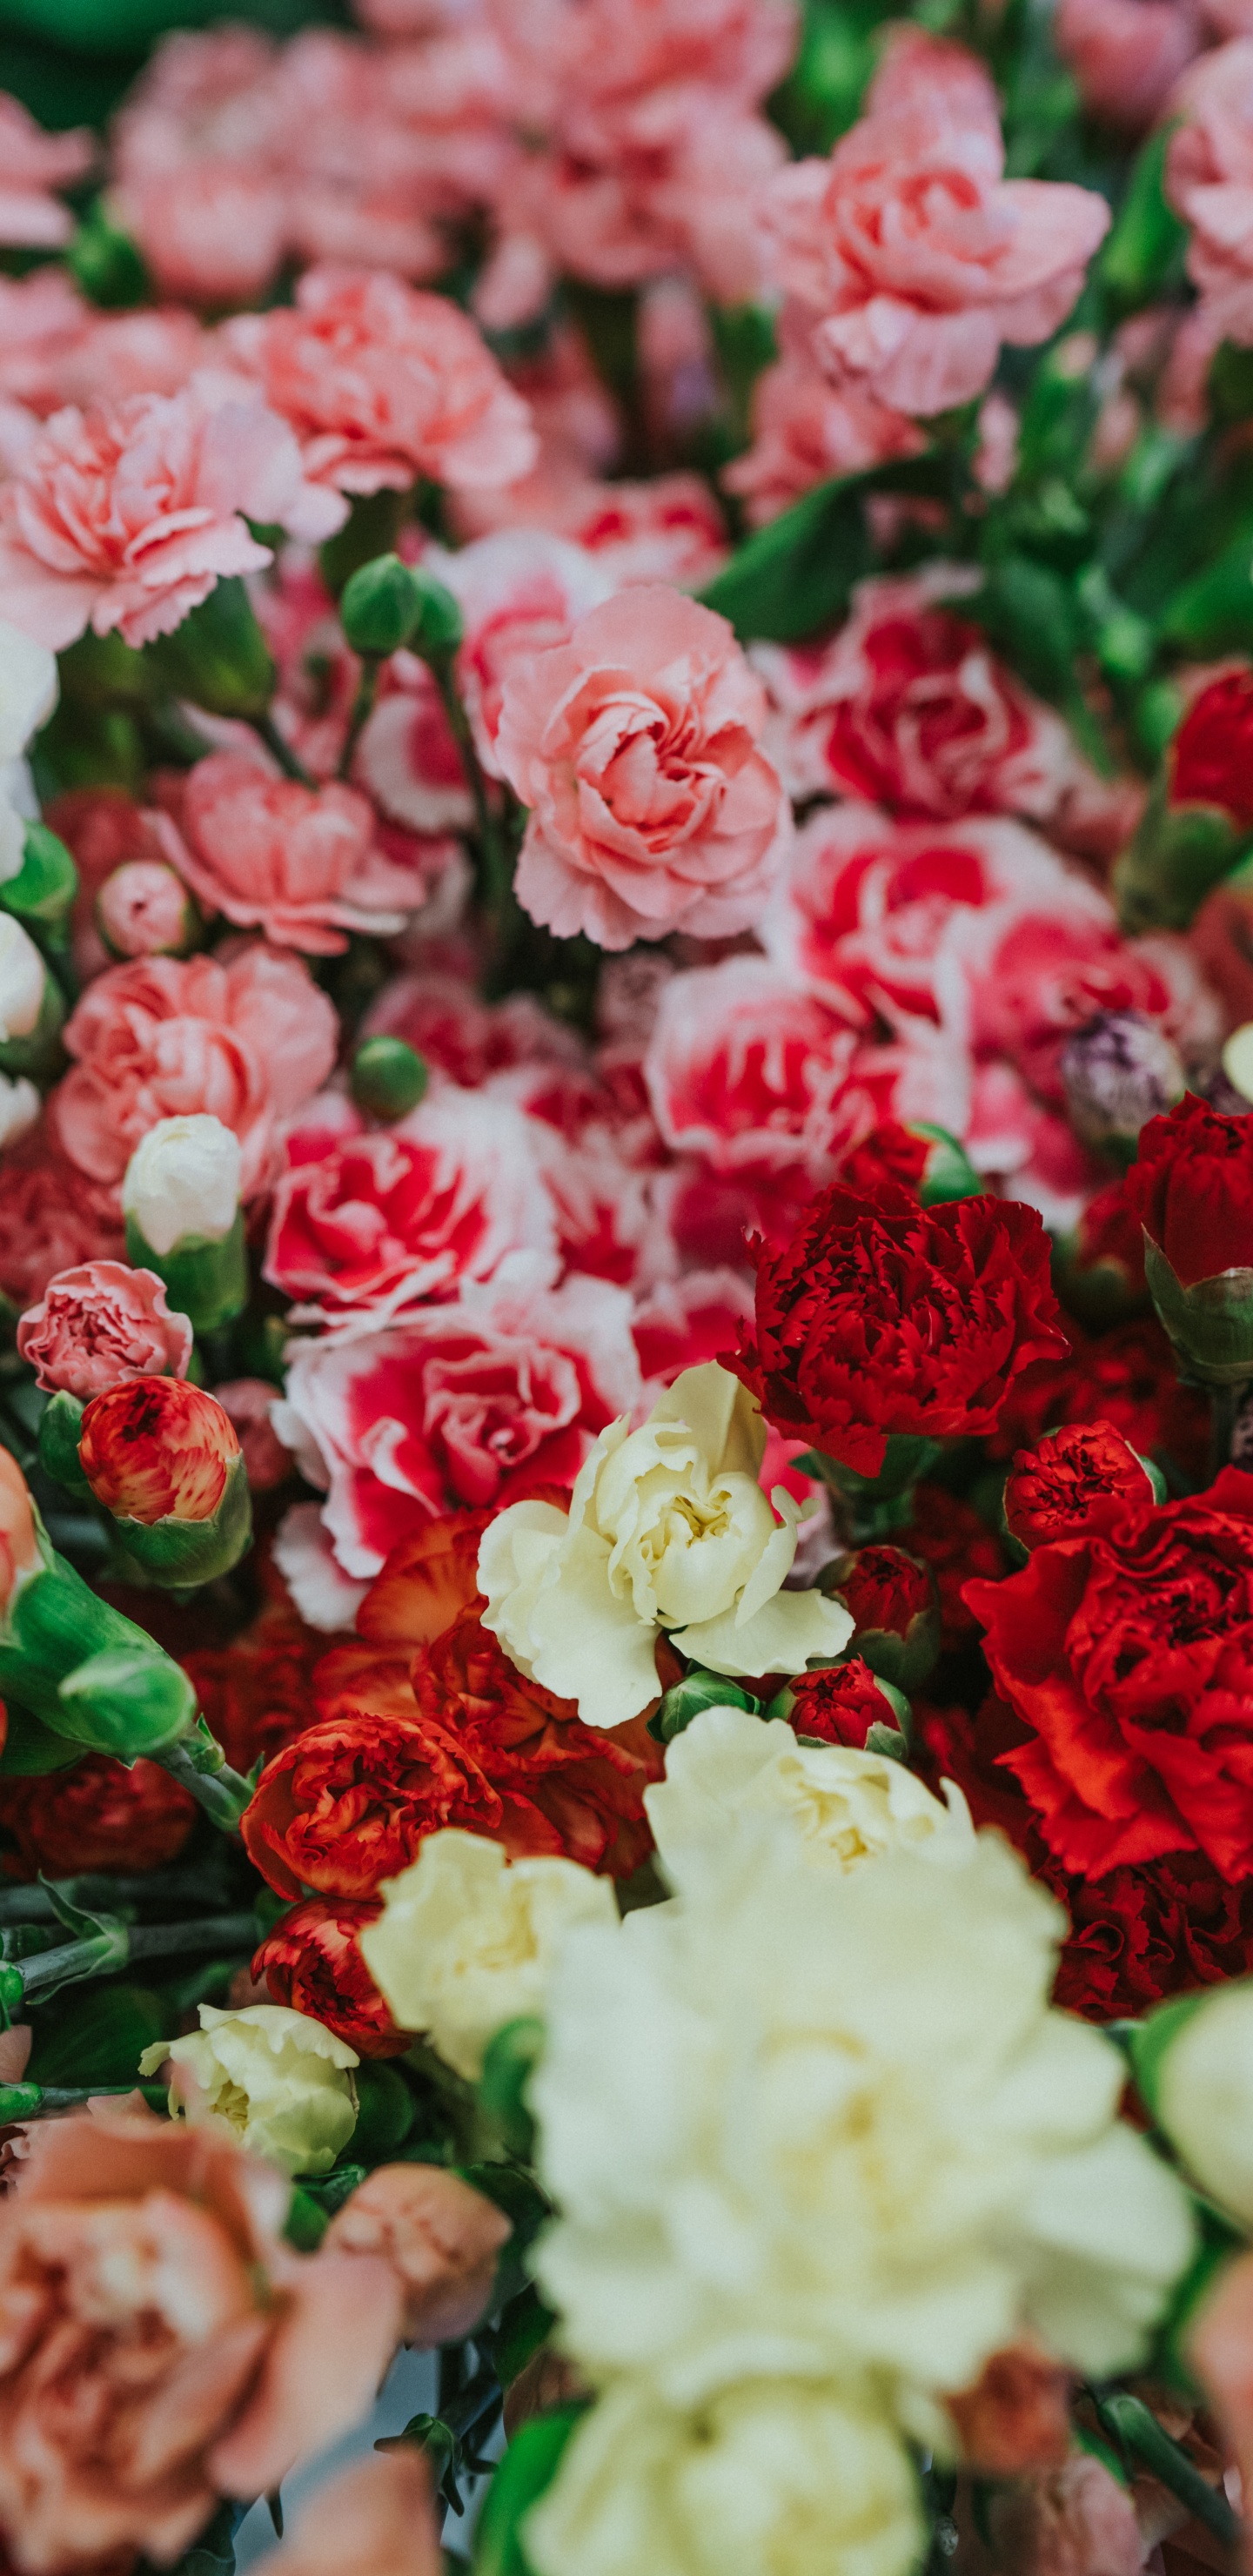 White and Red Roses in Close up Photography. Wallpaper in 1440x2960 Resolution